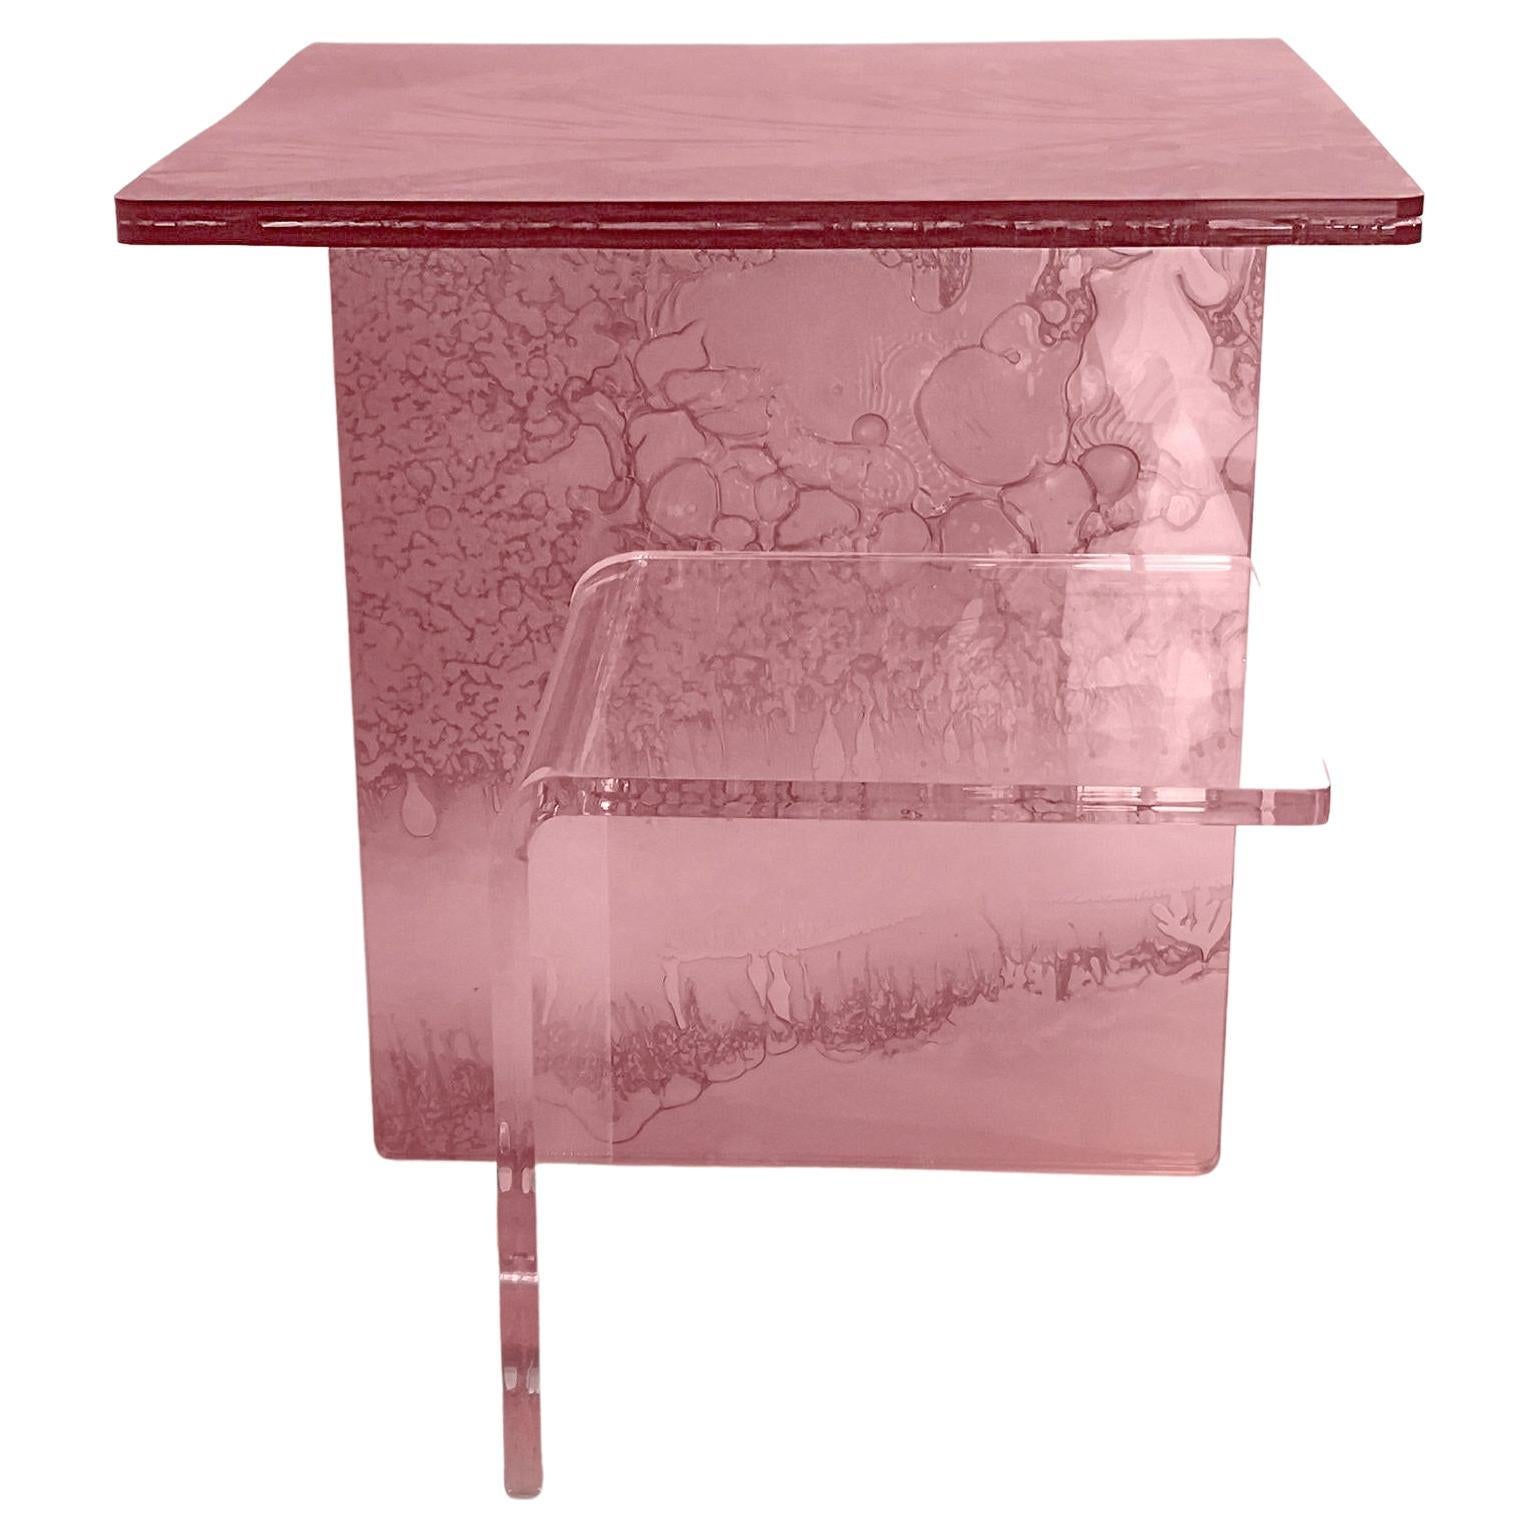 Sketch Elle Sidetable Made of Pink Acrylic Des, Roberto Giacomucci in 2022